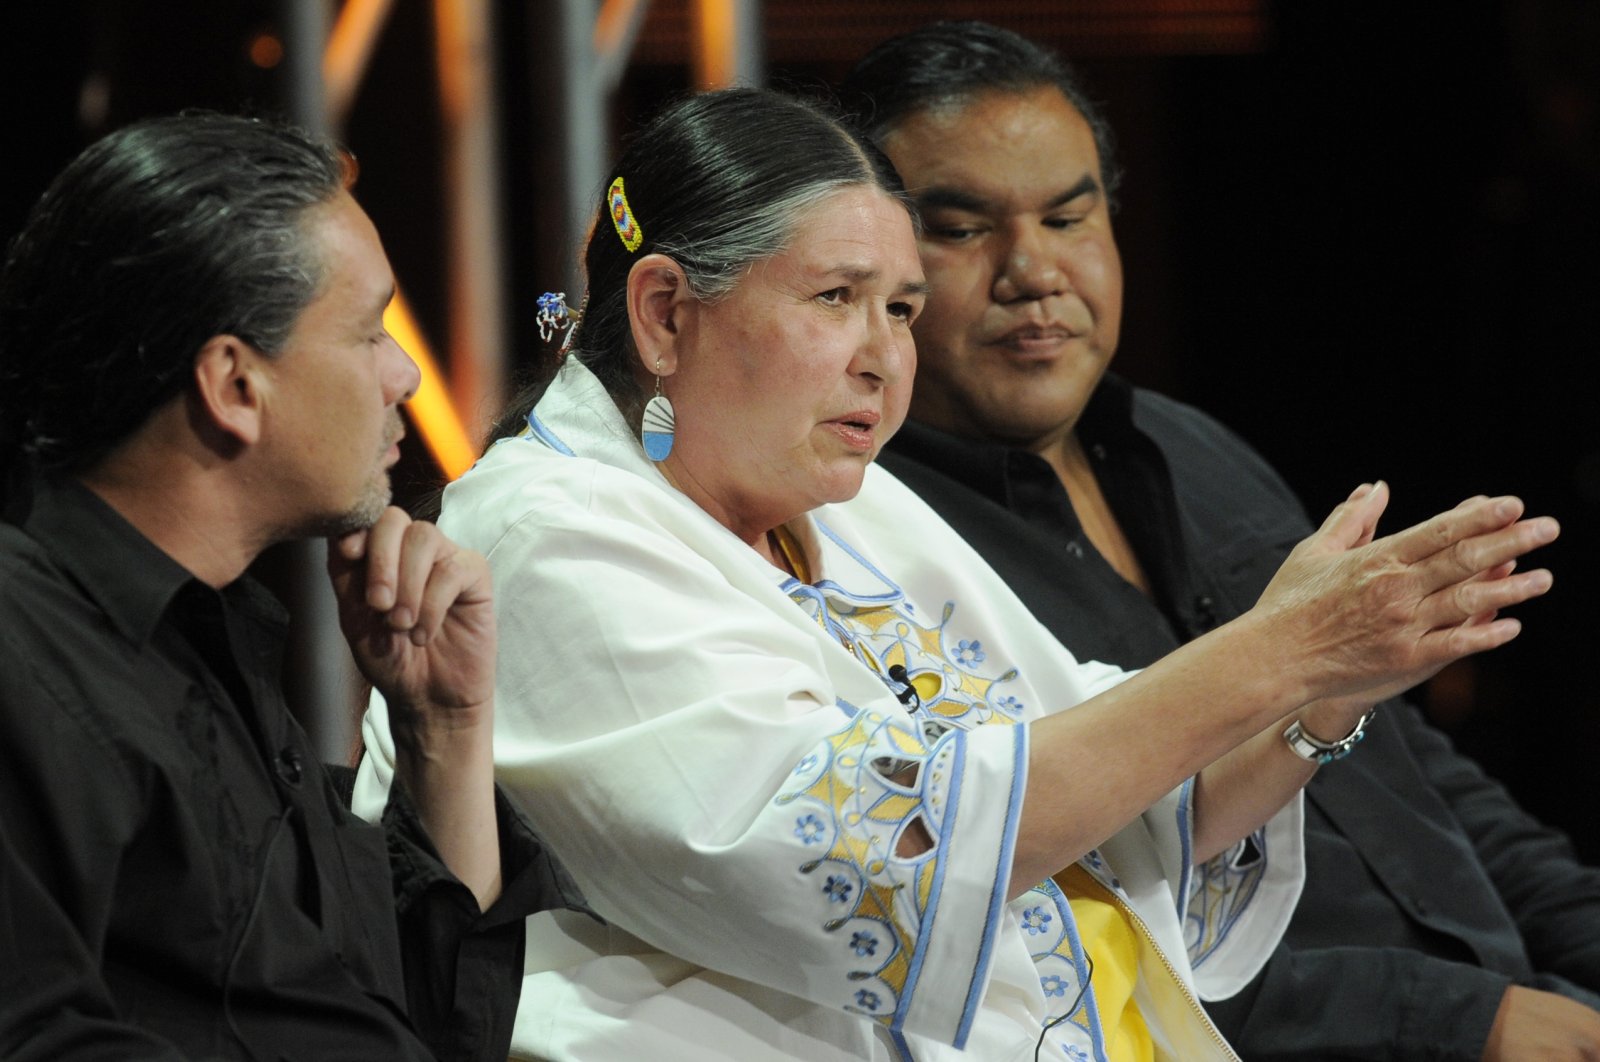 Activist and actress Sacheen Littlefeather, a subject of the PBS special &quot;Reel Injun,&quot; participates in a panel discussion about the show with directors Neil Diamond (L) and Chris Eyre at the PBS Television Critics Association summer press tour in Beverly Hills, California, U.S., Aug. 5, 2010. (AP Photo)